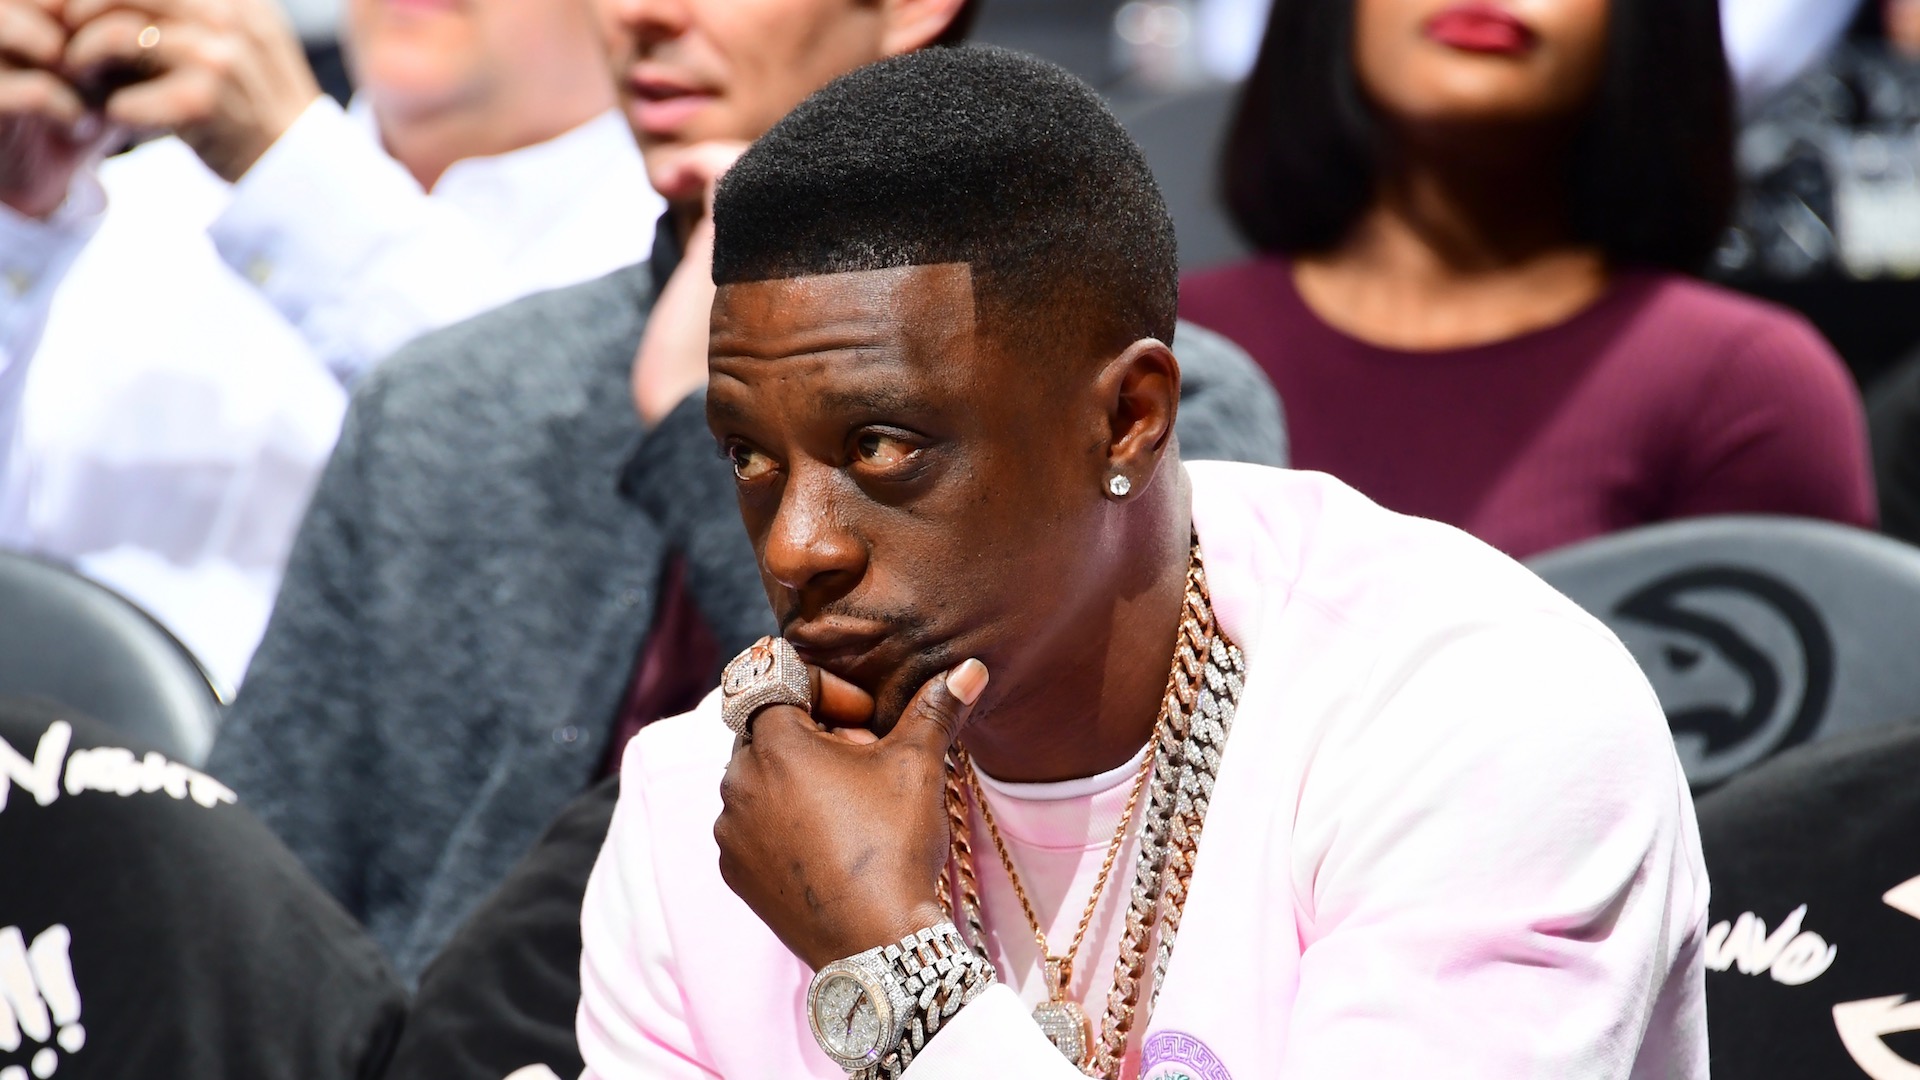 Boosie Badazz Faces Backlash After Claiming He Got Grown Woman to Give His Underage Son Oral Sex Complex